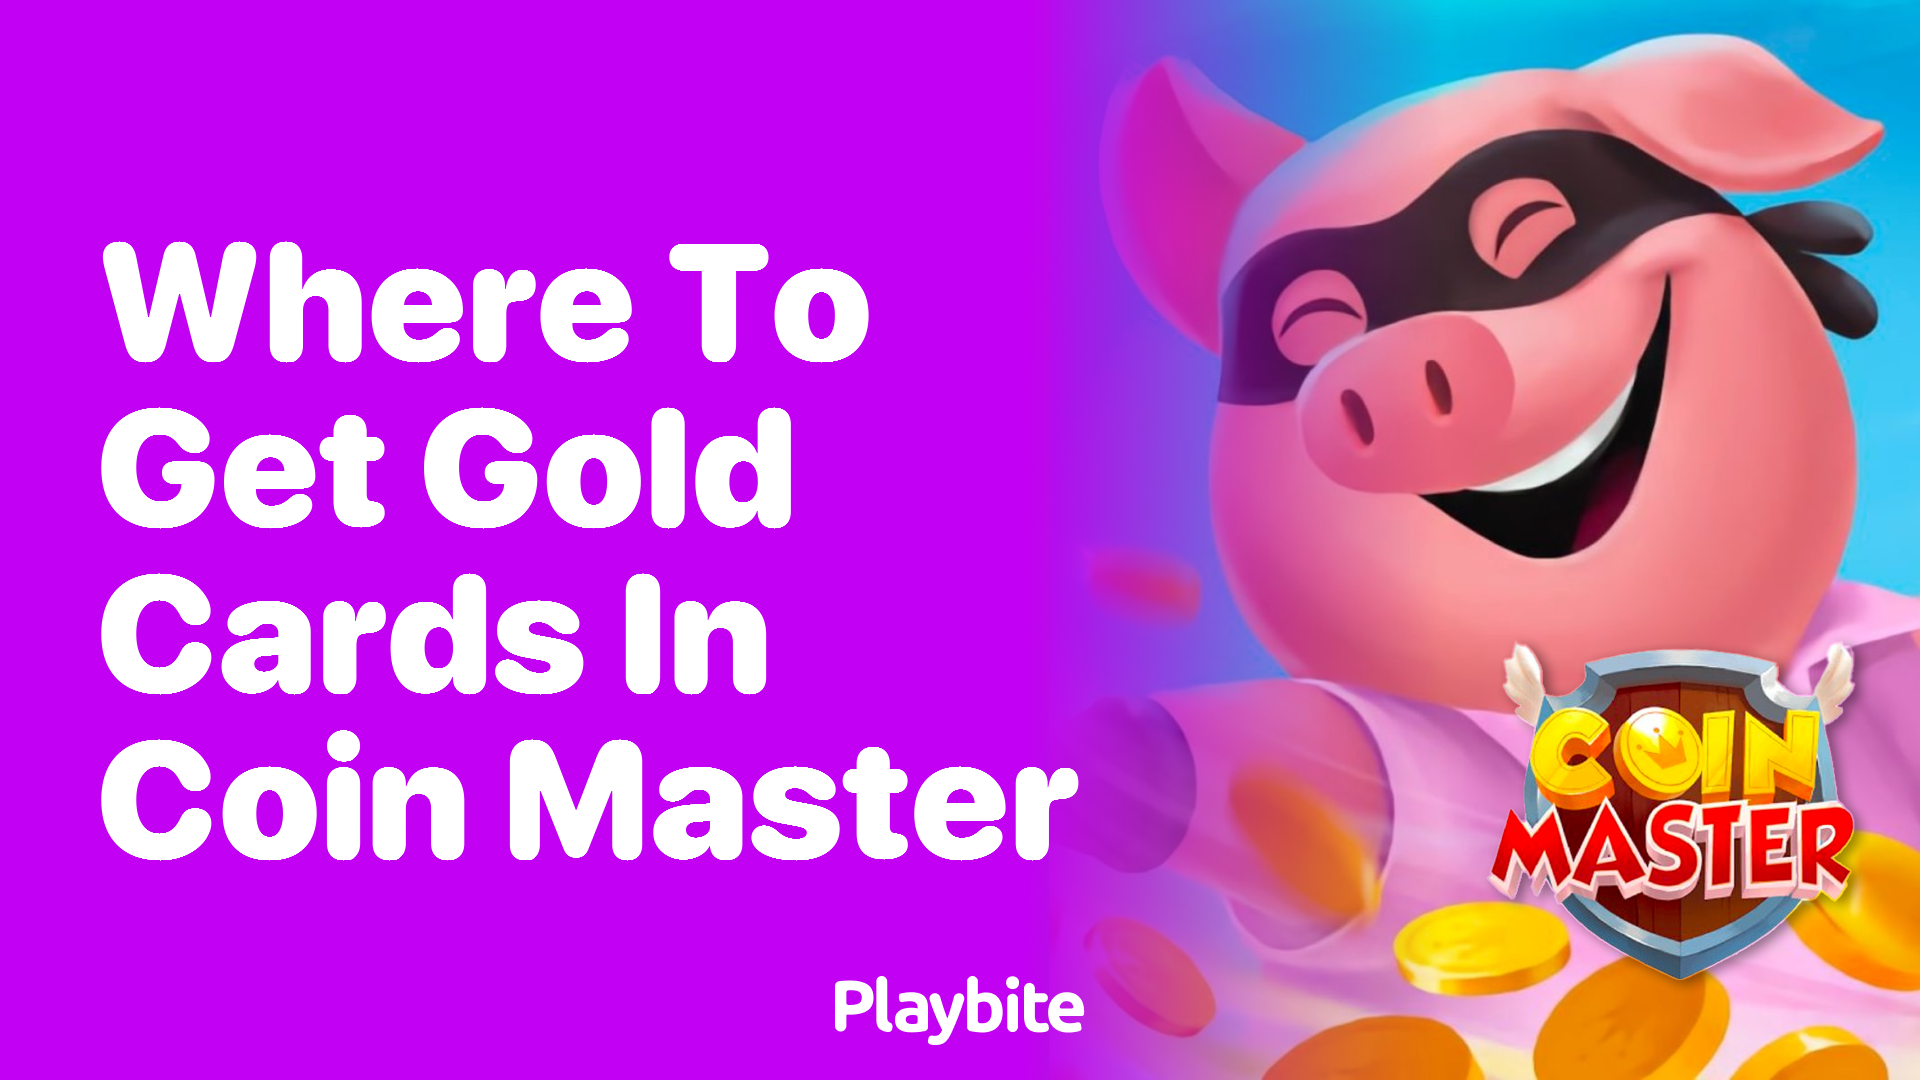 Get Coin Master Gold Cards Free - New Viral Working Trick